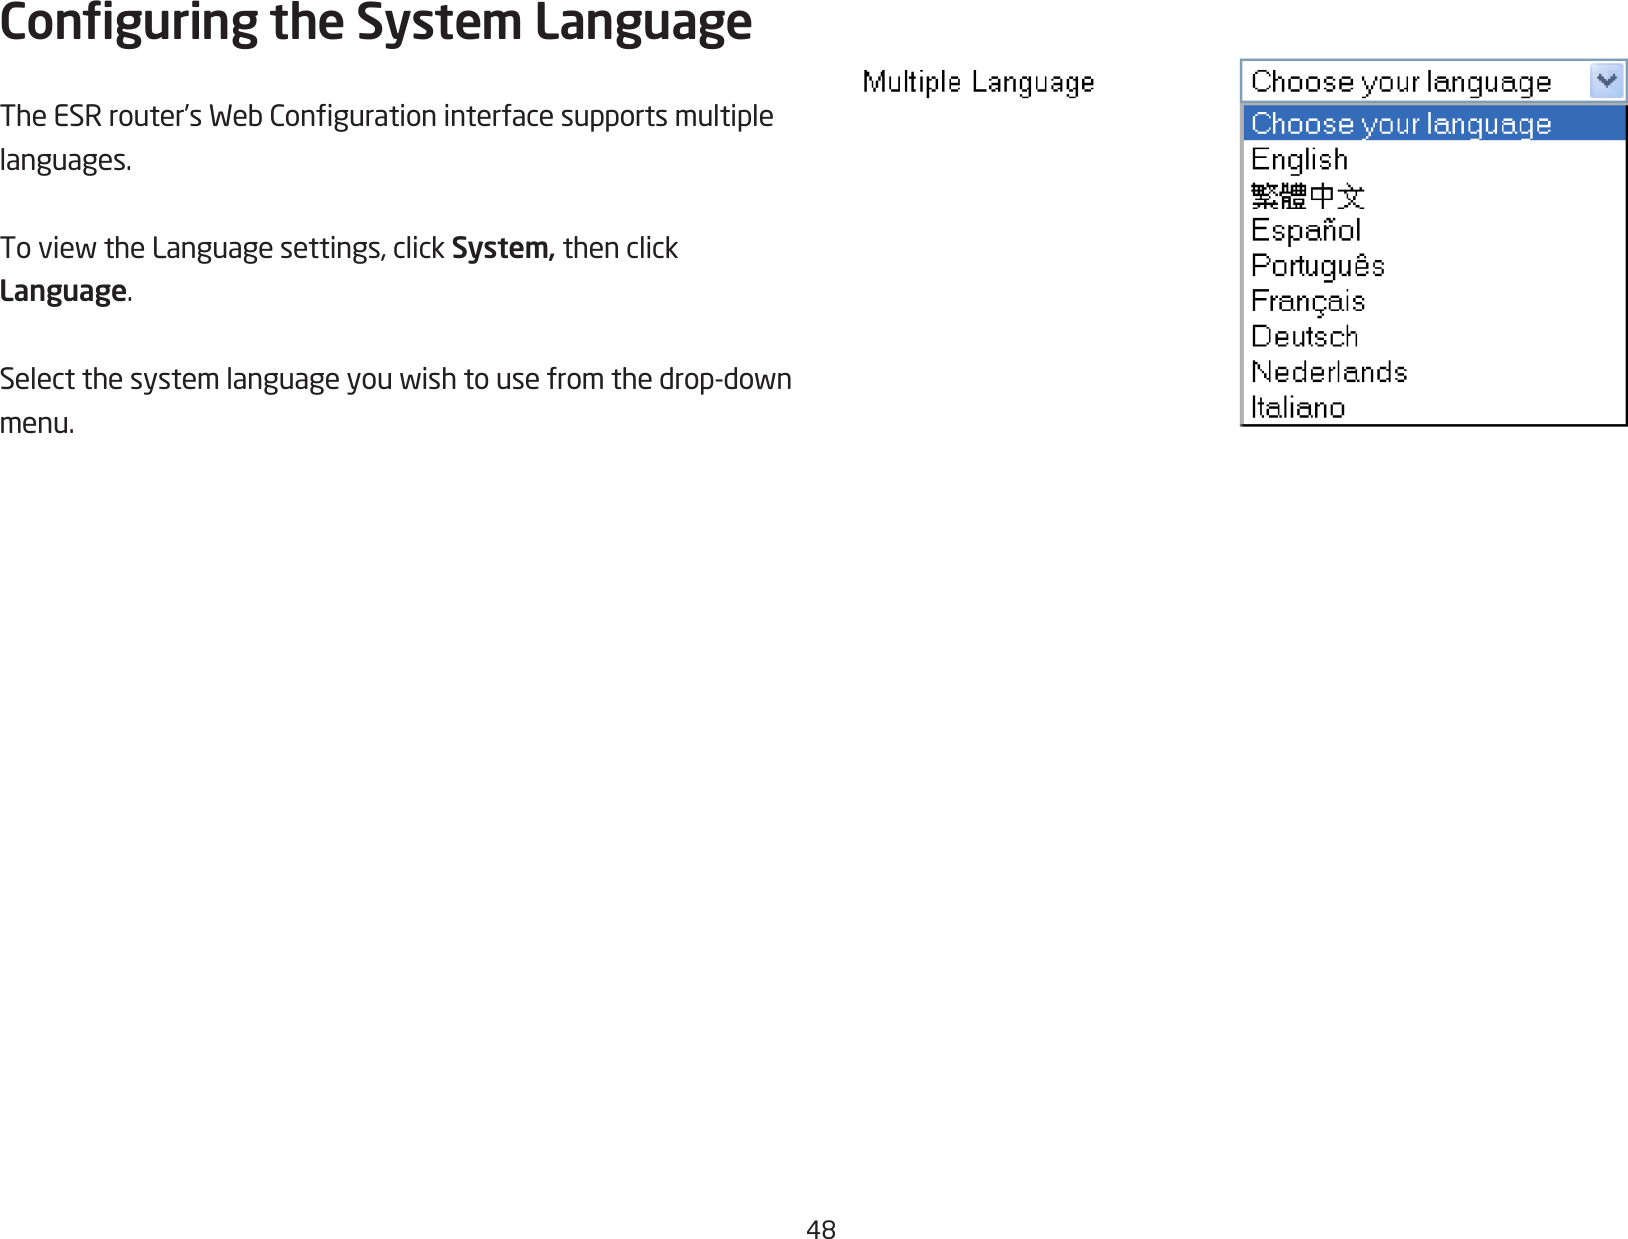 48Conguring the System LanguageTheESRrouter’sWebCongurationinterfacesupportsmultiplelanguages.ToviewtheLanguagesettings,clickSystem, then click Language.Selectthesystemlanguageyouwishtousefromthedrop-downmenu.